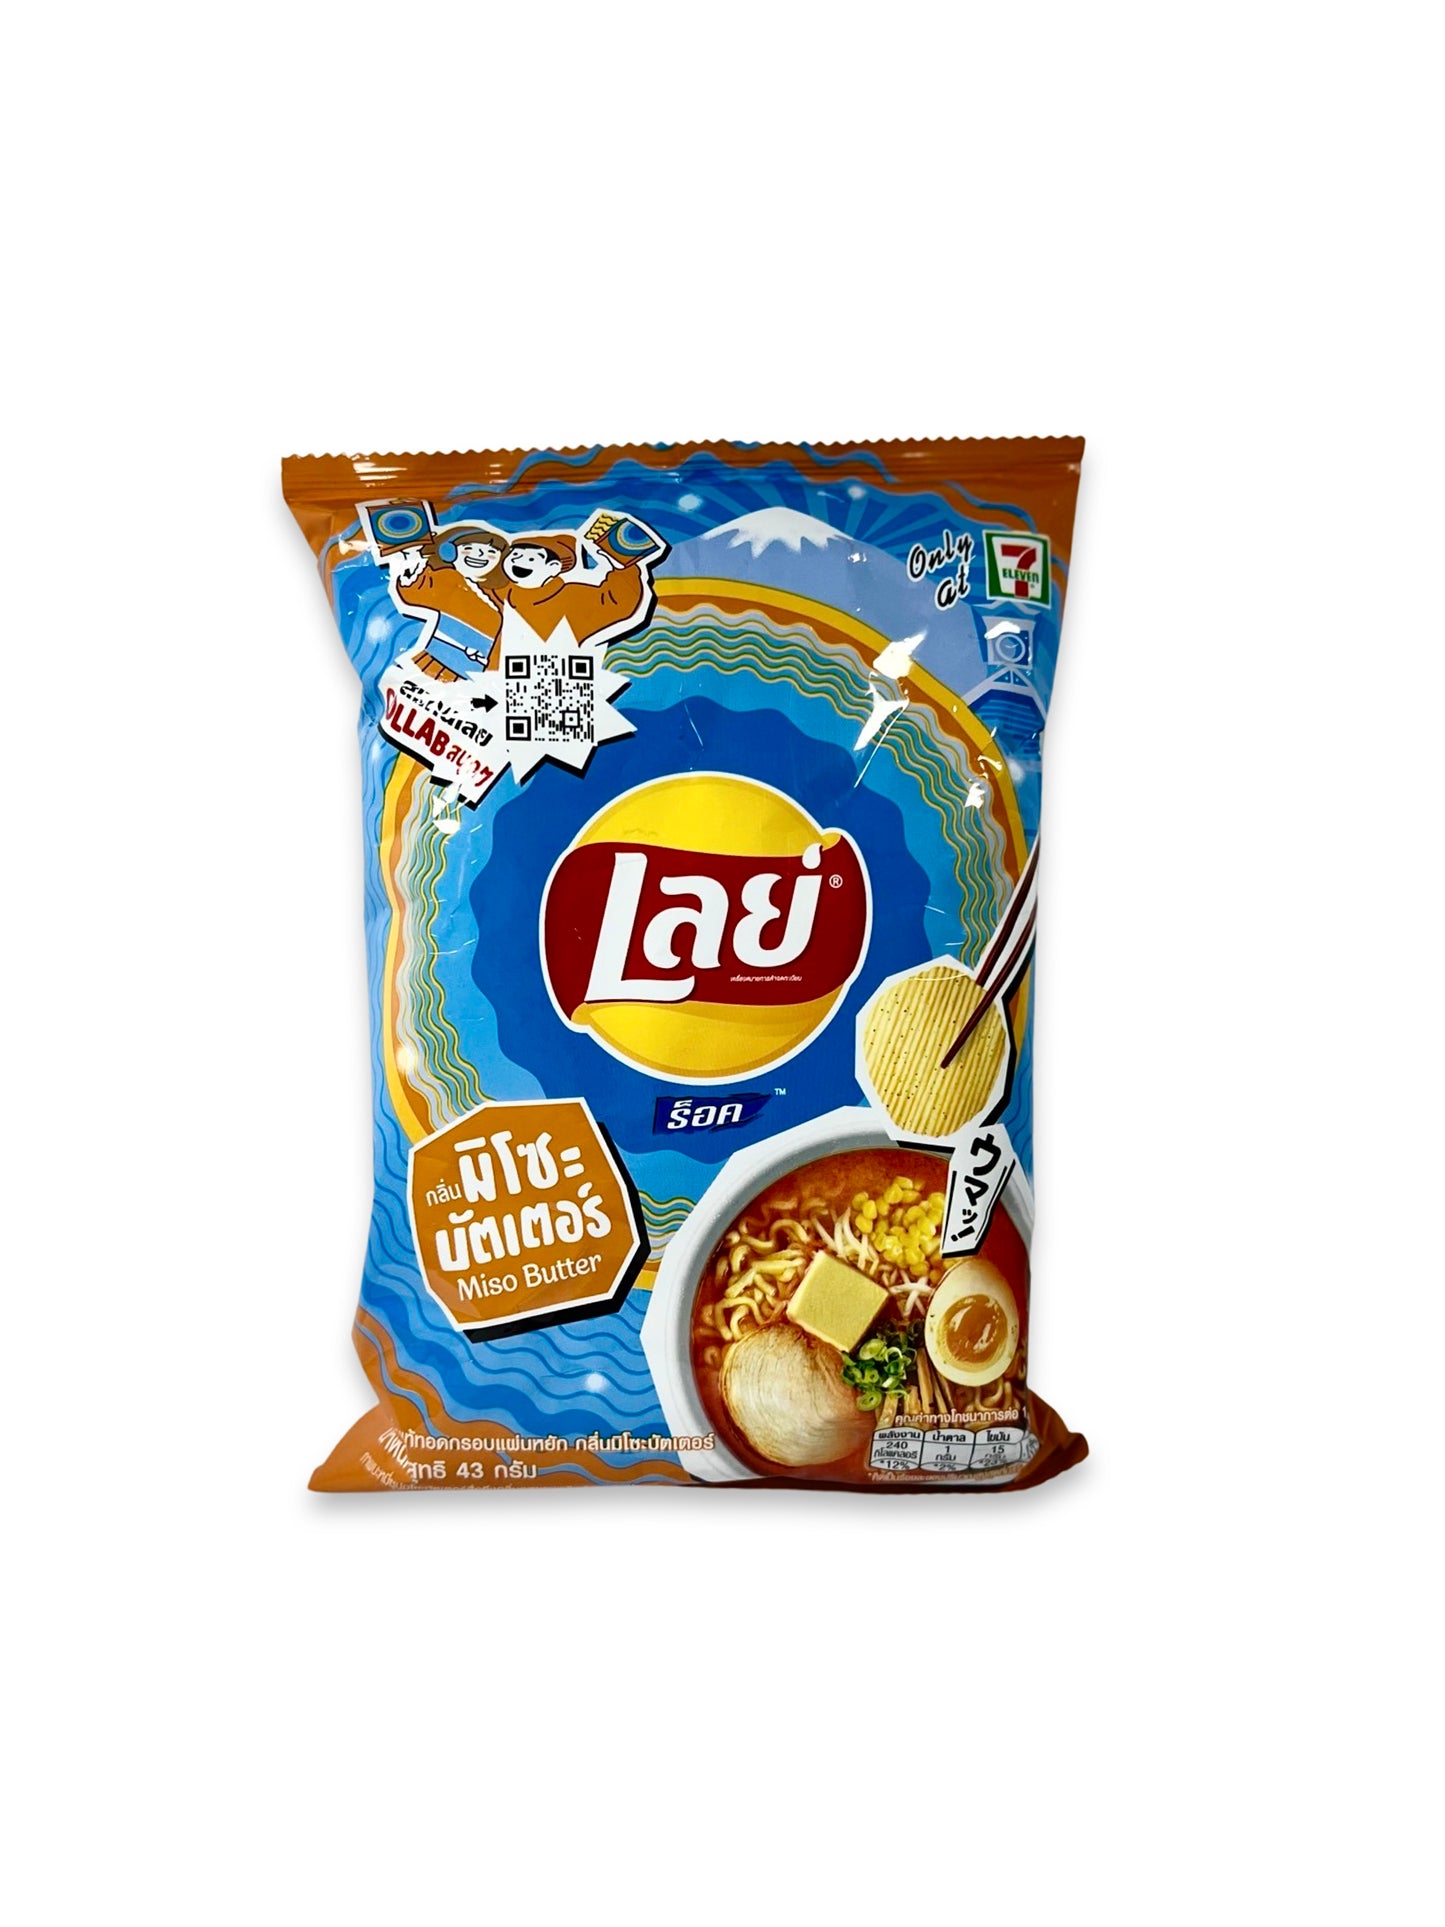 Lay's Potato Chips - Miso Butter